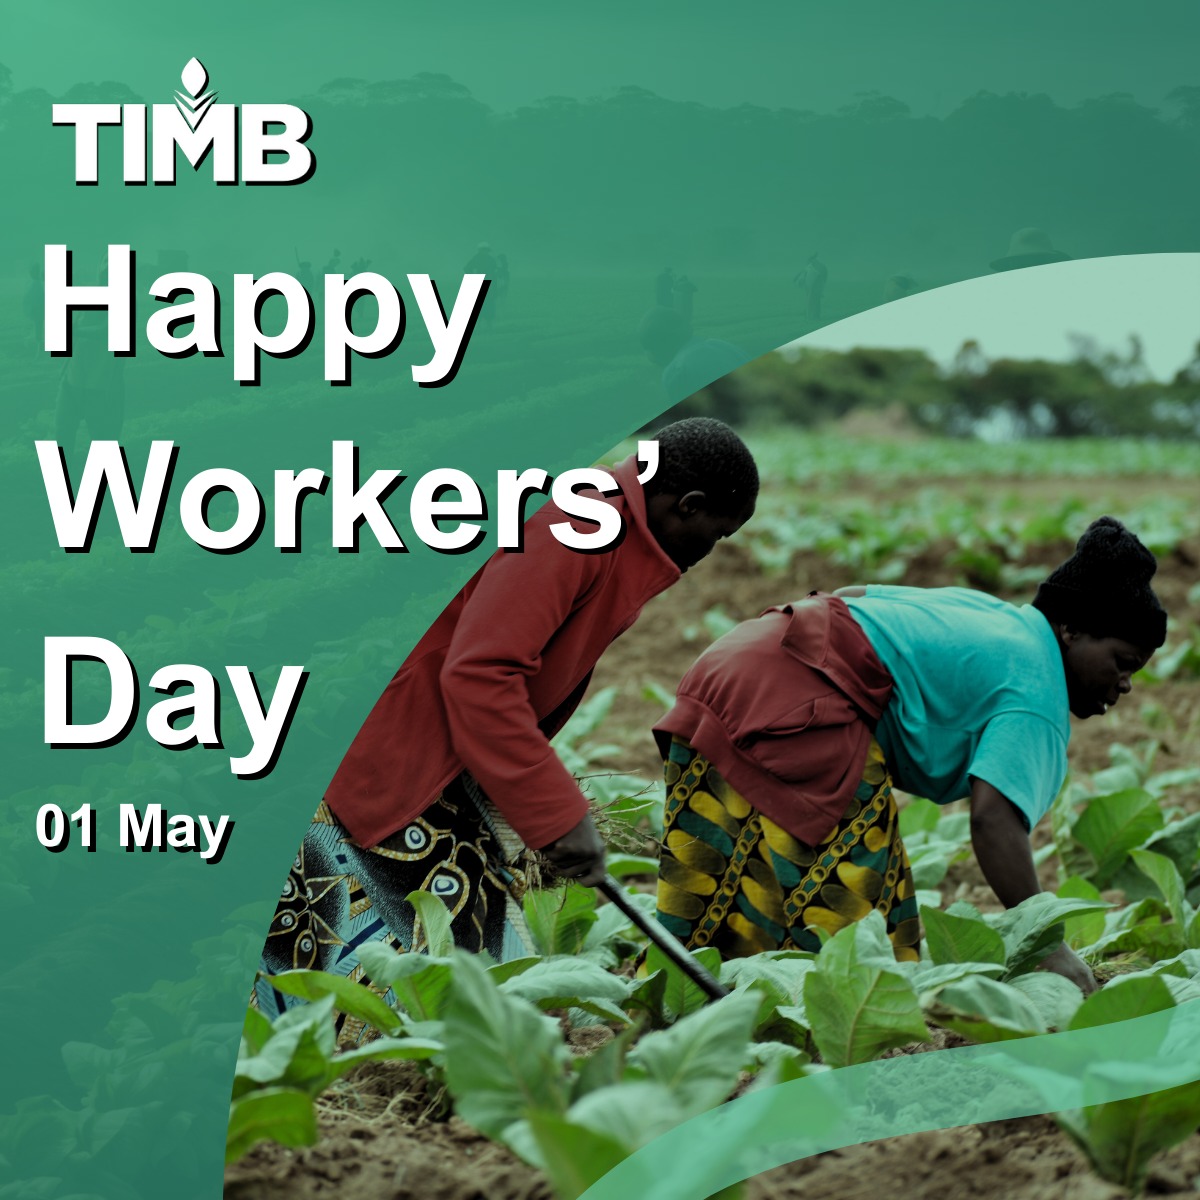 Happy Workers' Day!